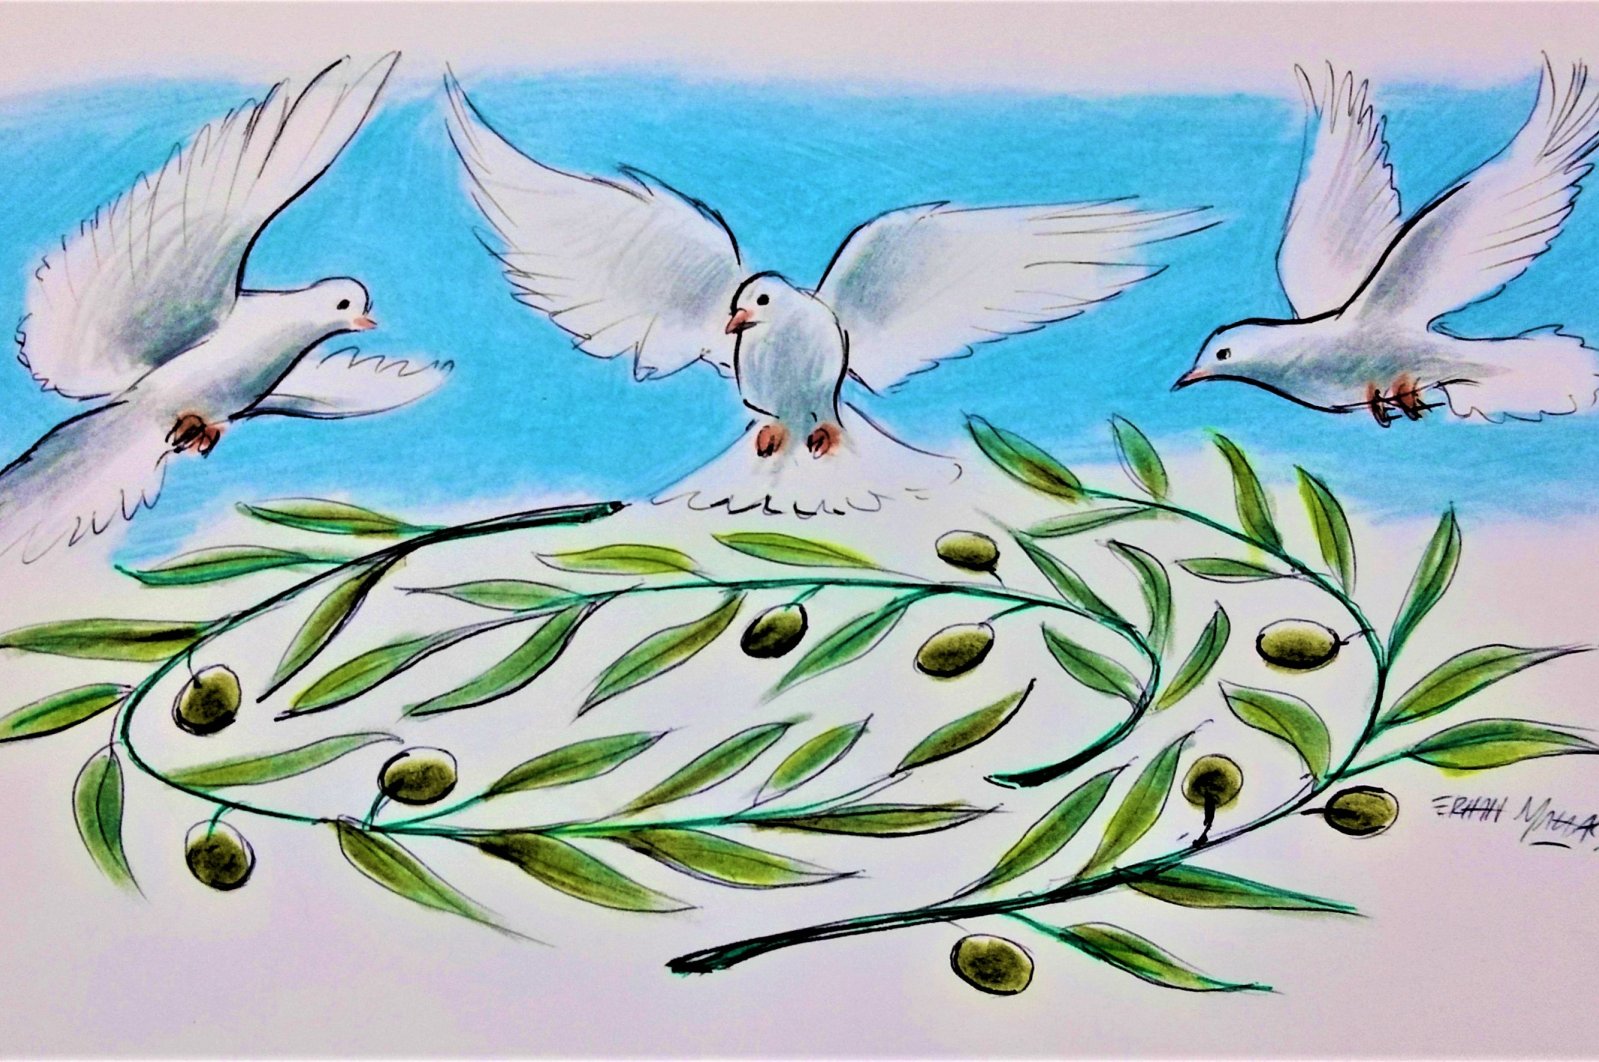 Illustration by Erhan Yalvaç shows doves and olive branches in a reference to the new peace process in the Caucasus region.